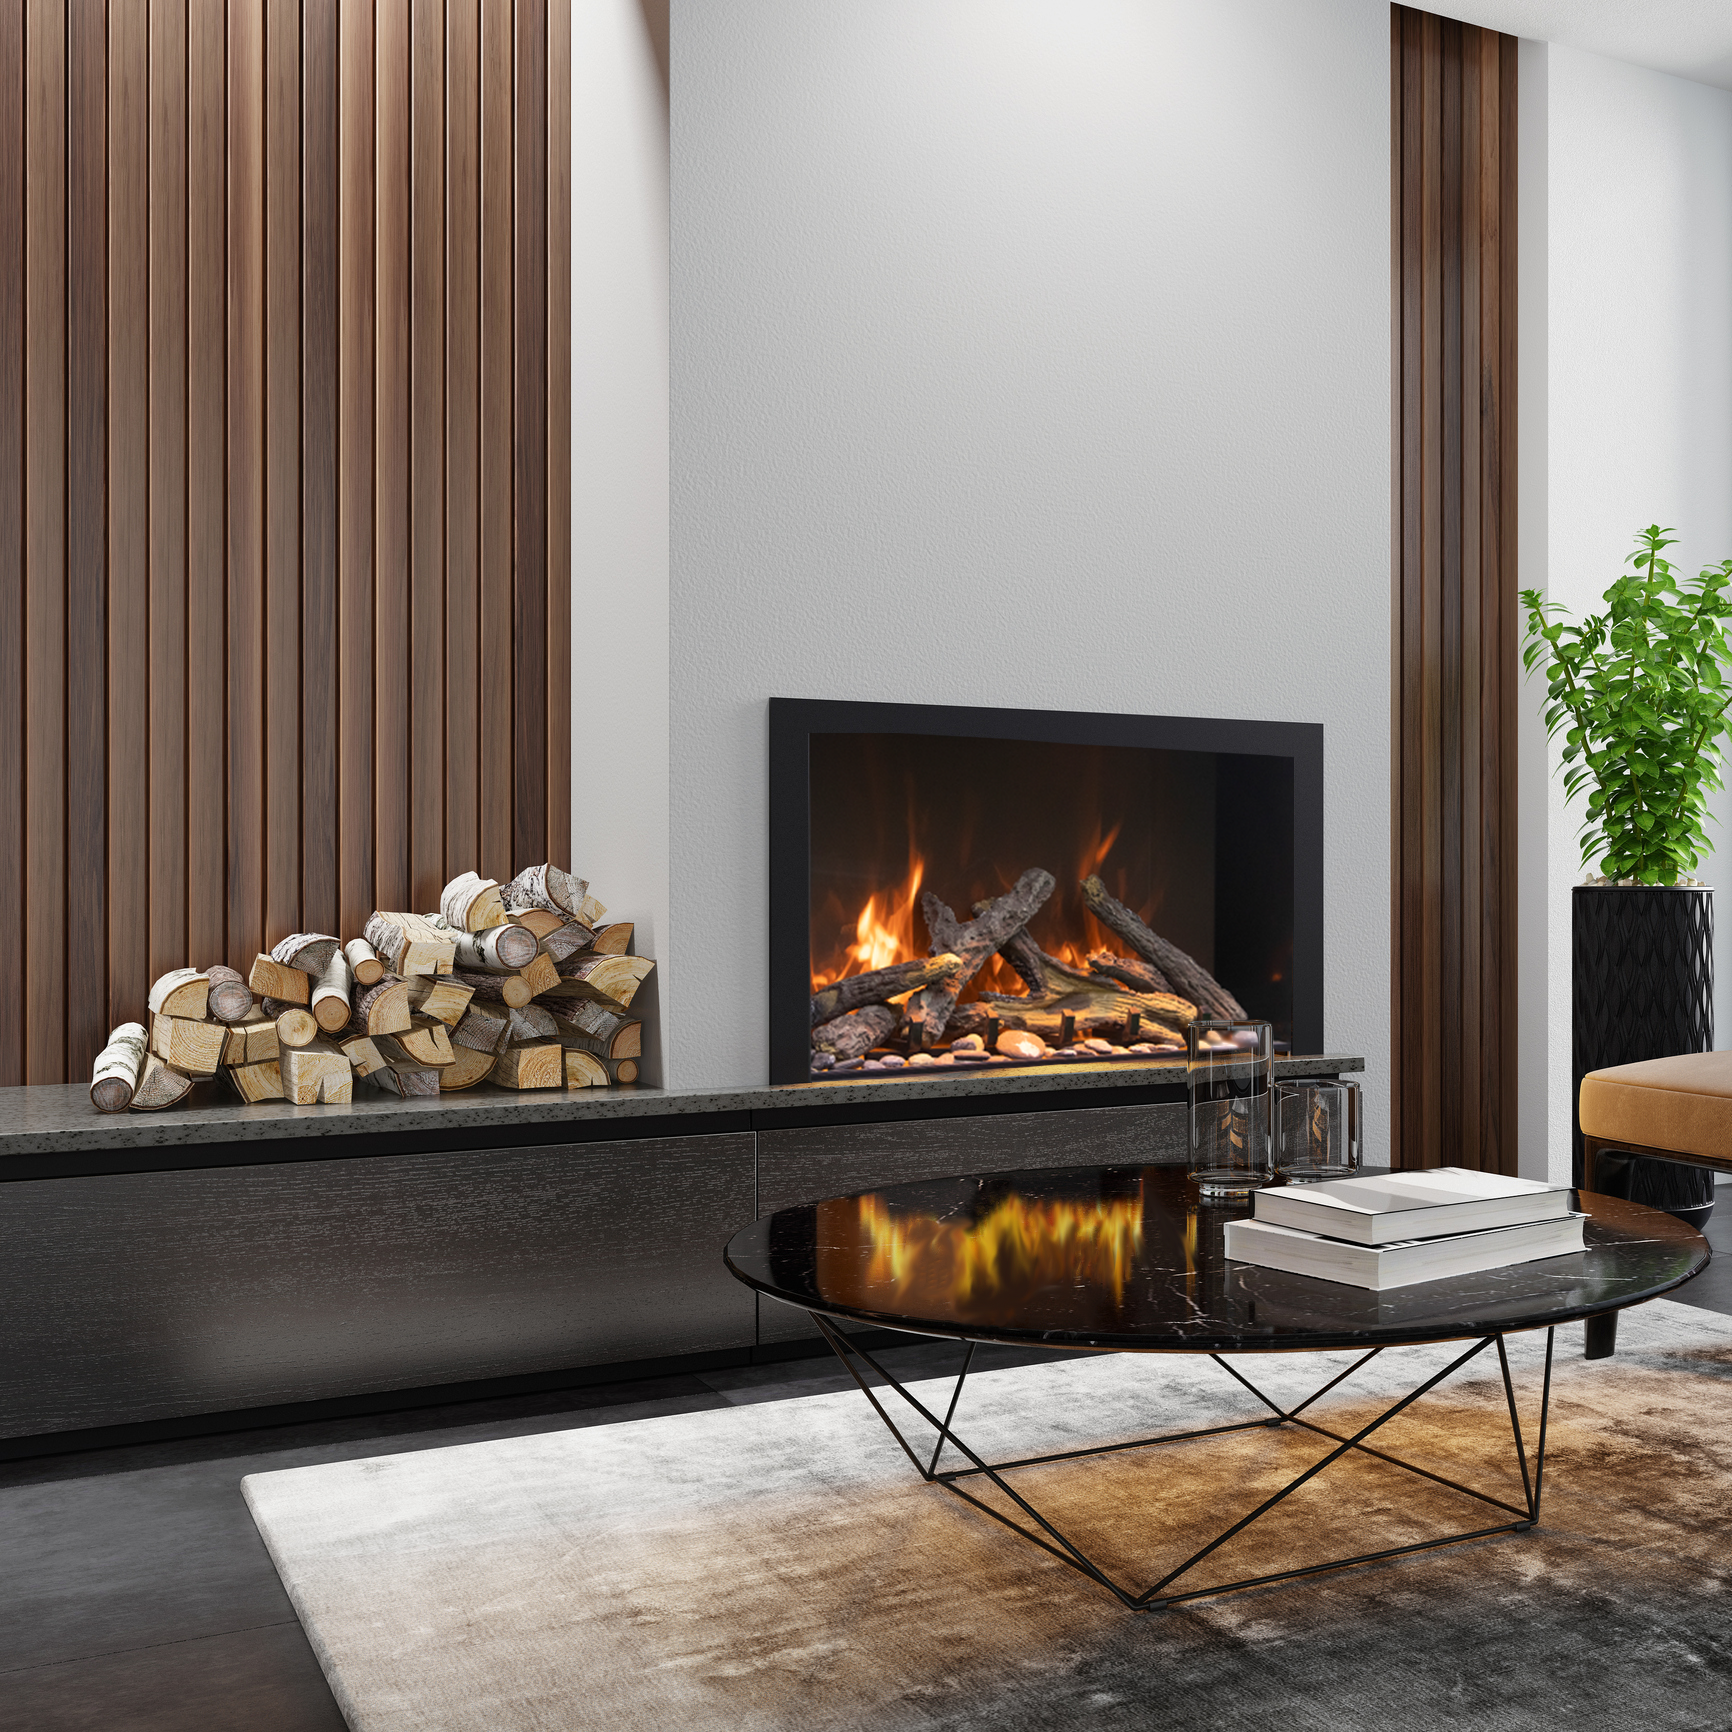 Sparkling Clean: A Step-by-Step Guide to Cleaning Your Electric Fireplace